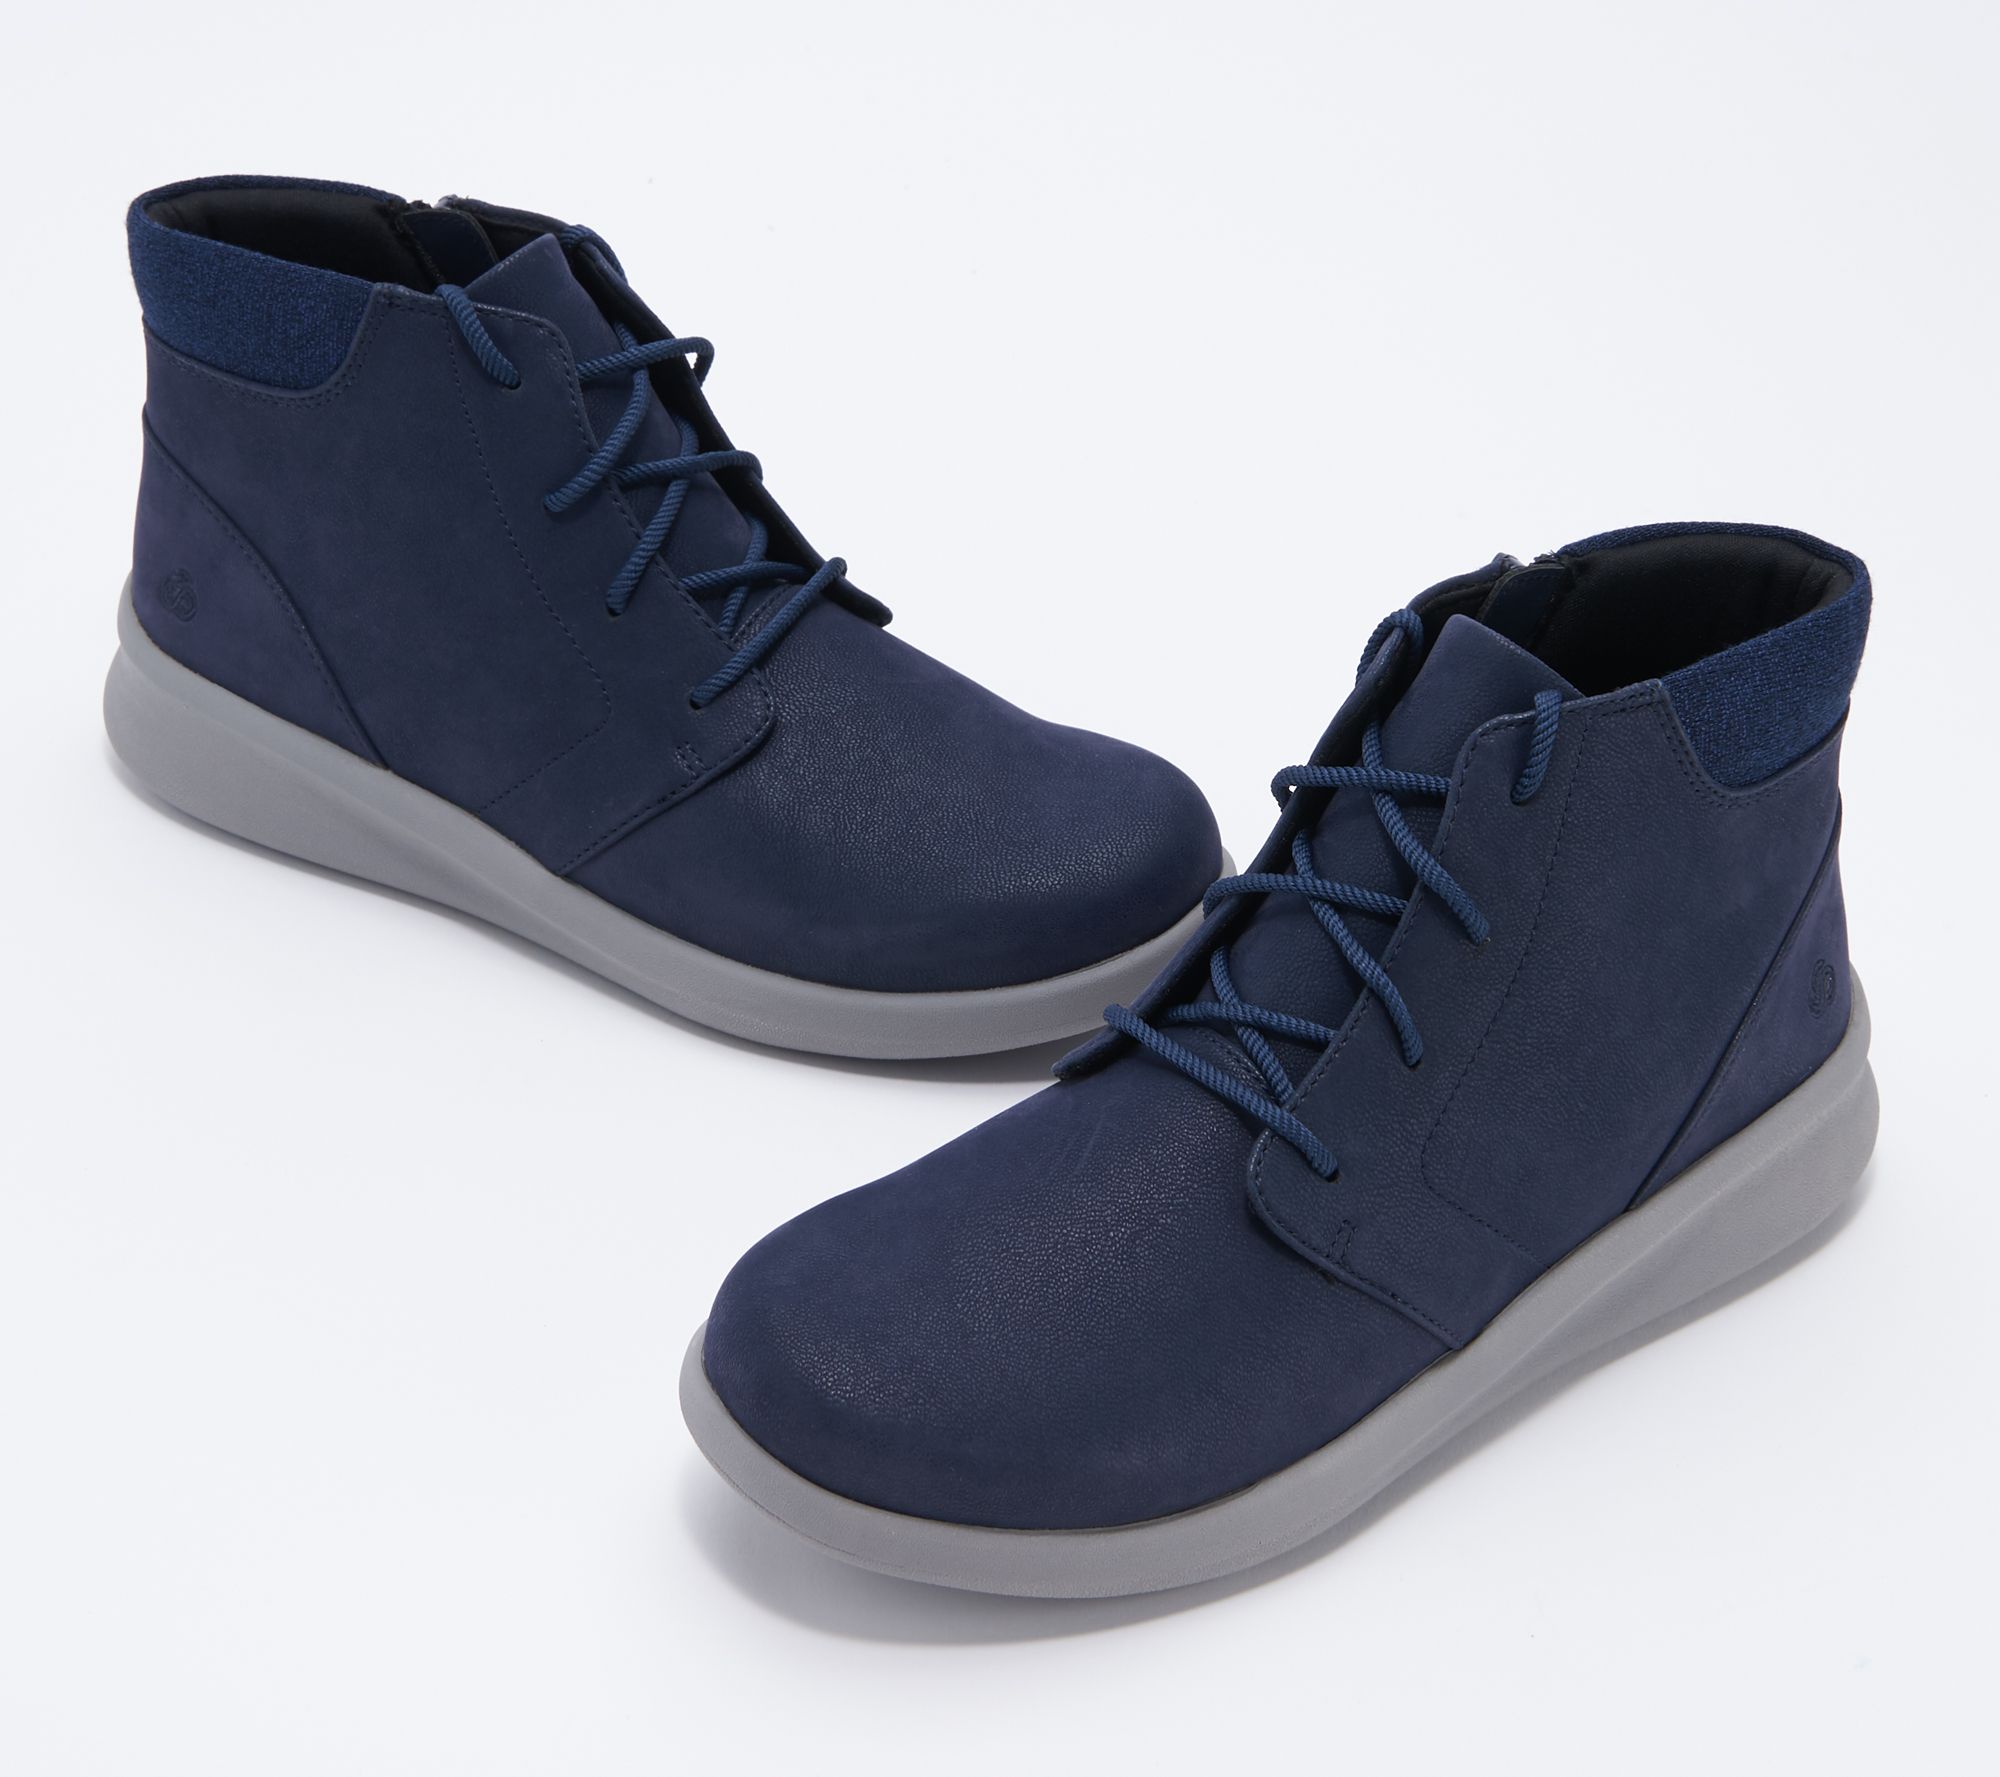 clarks cloudsteppers lace up